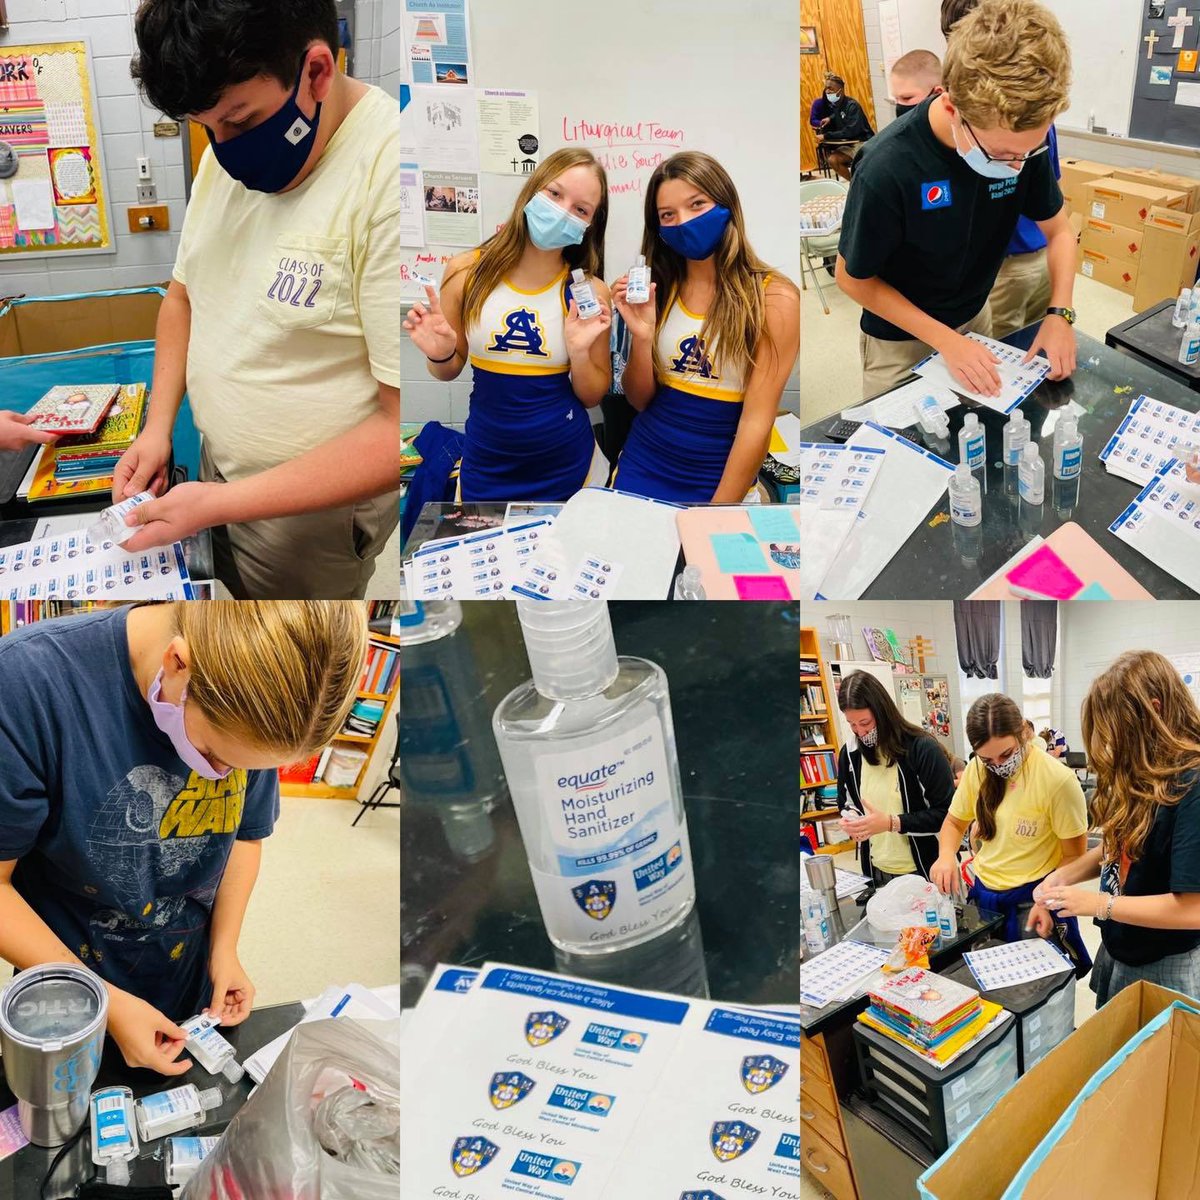 #SEPTEMBEROFSERVICE 

Our September of #Service Committee is preparing to give out hand sanitizers to our #community. 

Thank you to United Way of West Central Mississippi for helping us #LIVEUNITED!